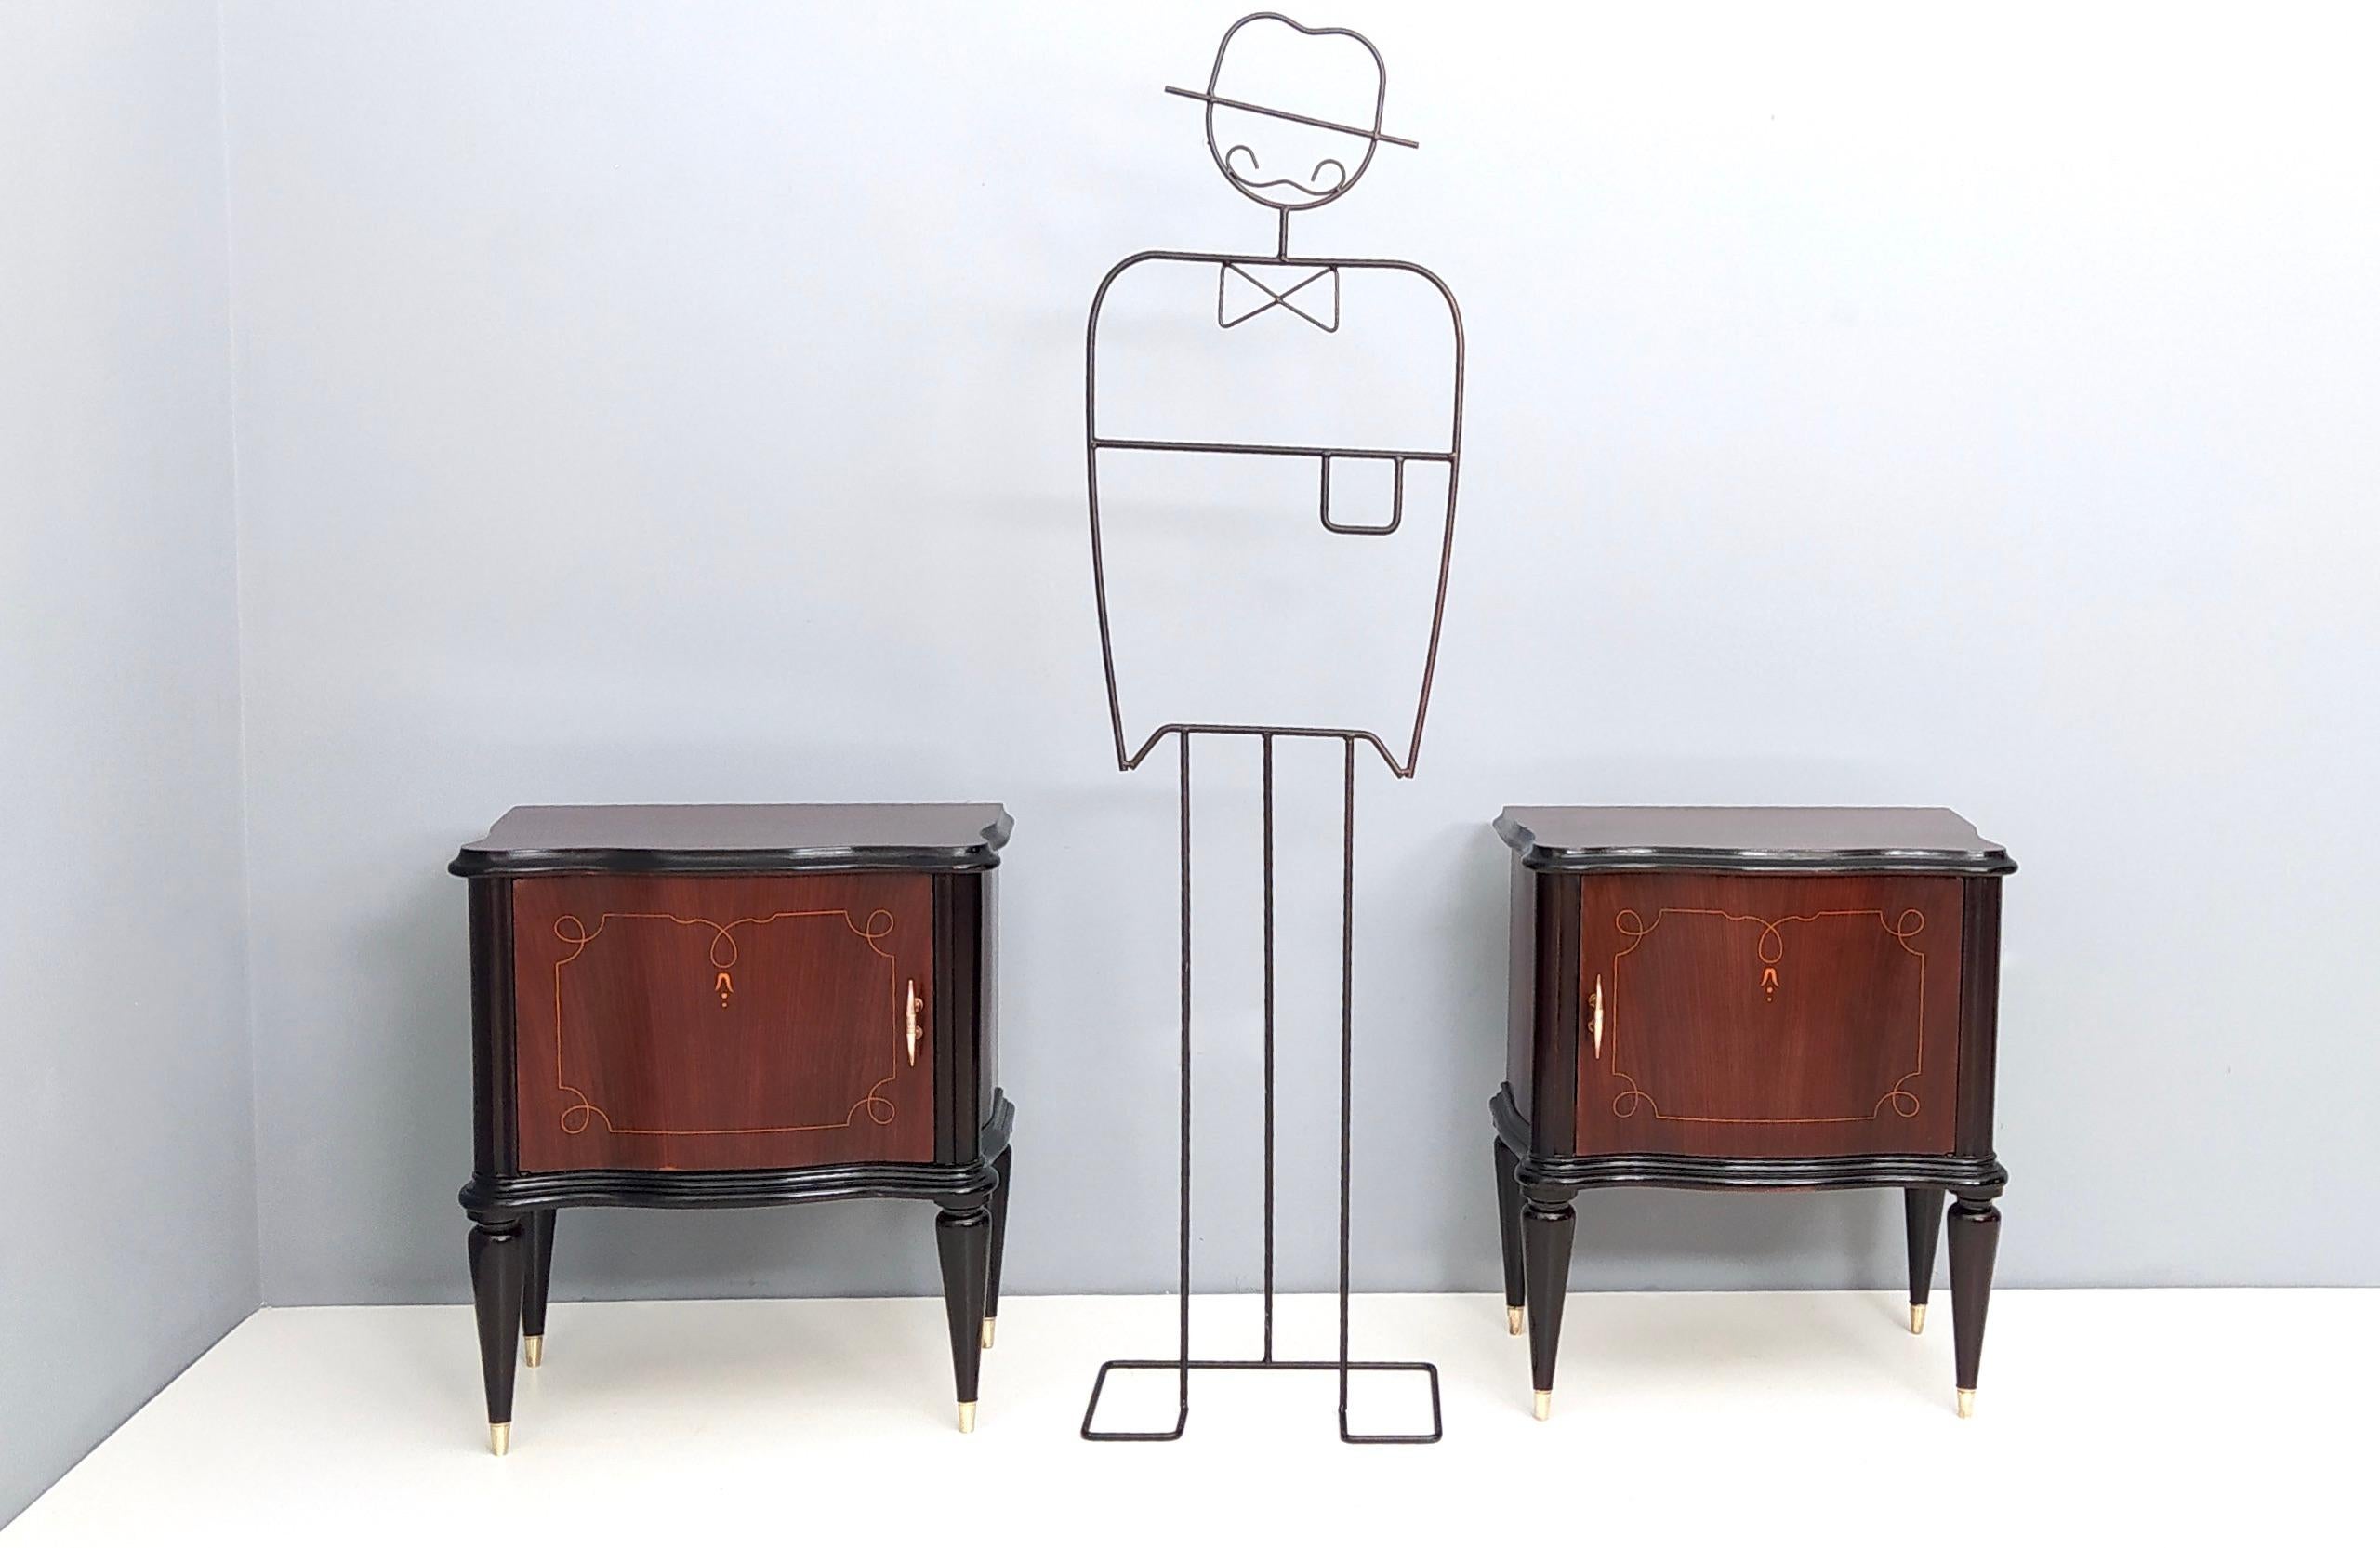 Made in Italy, 1950s.
They are made in walnut and feature inlaid, durmast interiors and brass handles and feet caps.
These nightstands may show slight traces of use since they're vintage, but they have been perfectly restored, therefore they can be